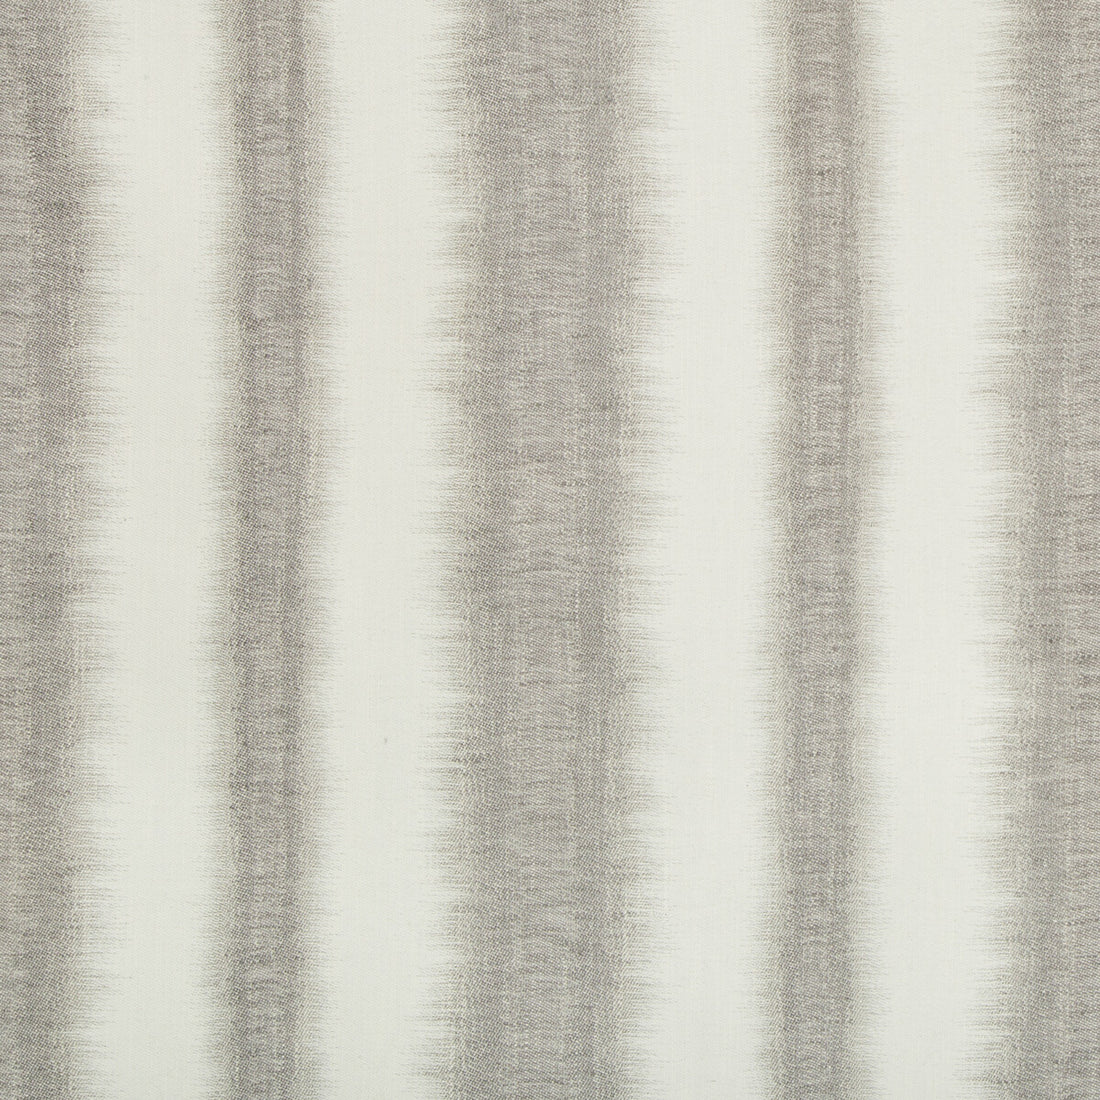 Windswell fabric in pewter color - pattern 34979.11.0 - by Kravet Basics in the Jeffrey Alan Marks Oceanview collection